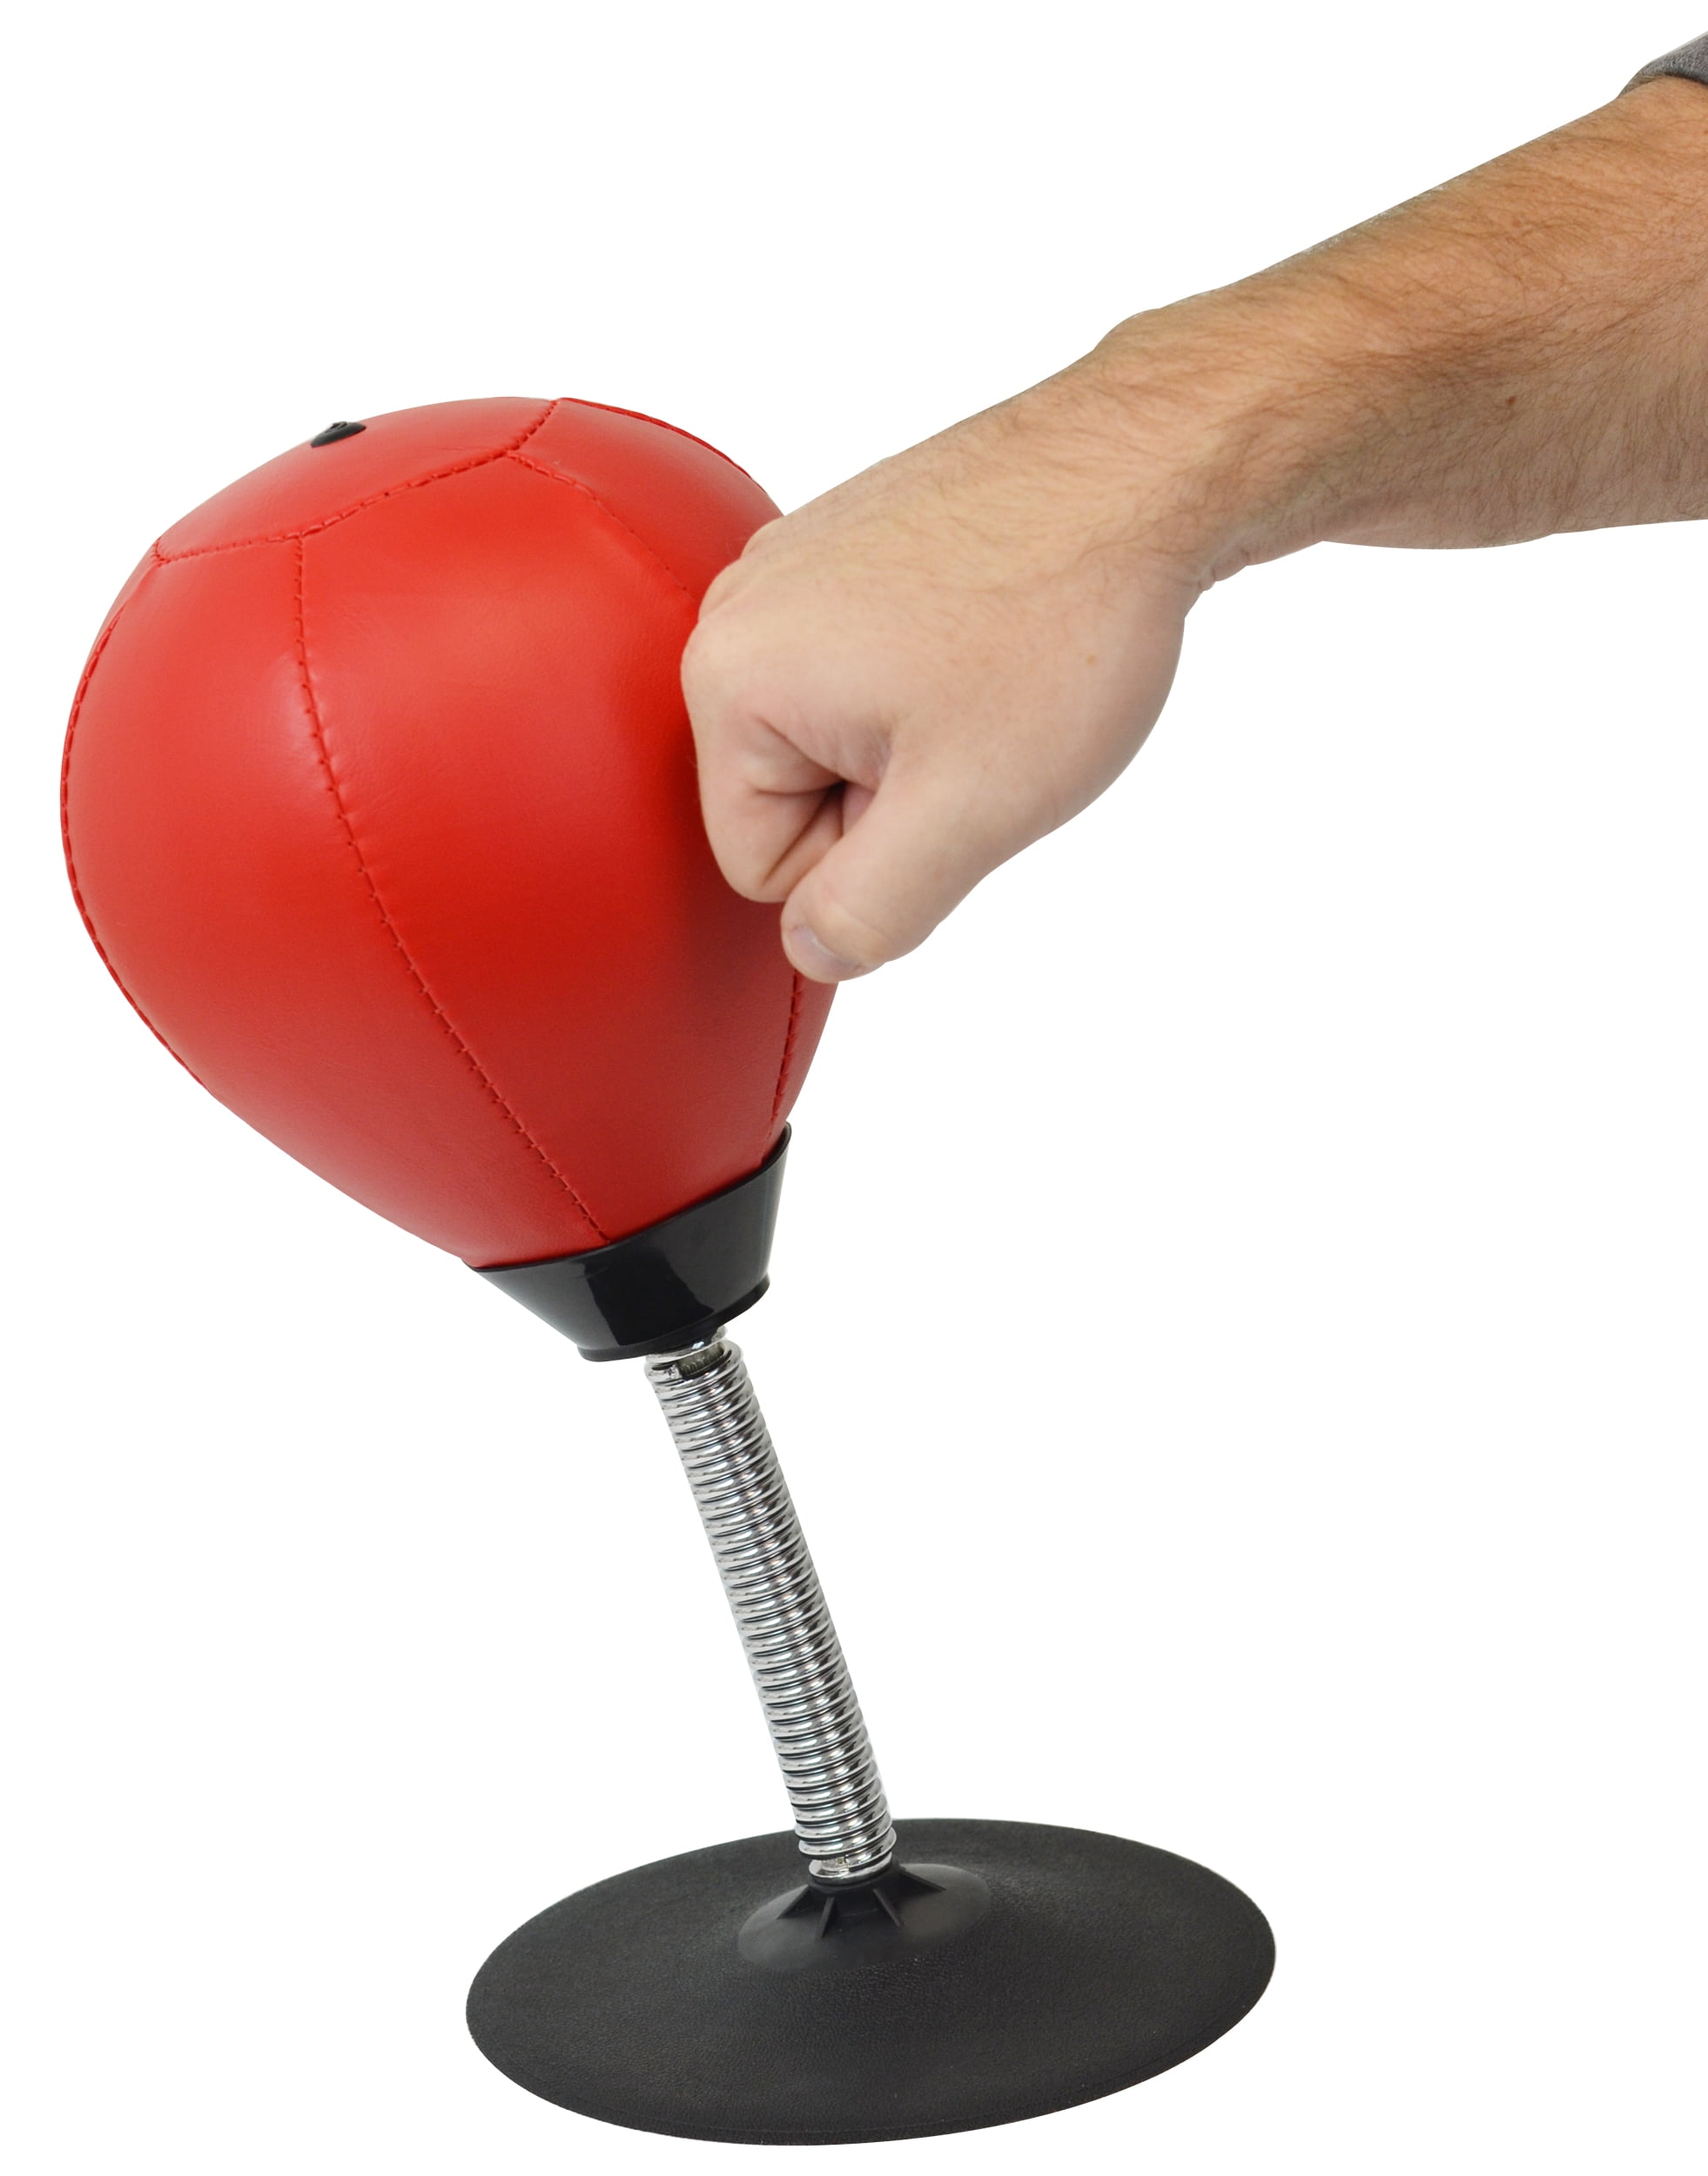 Desktop Punching Bag Stress Reliever Ball Suction Cup Stand Boxing Speed Desk US 